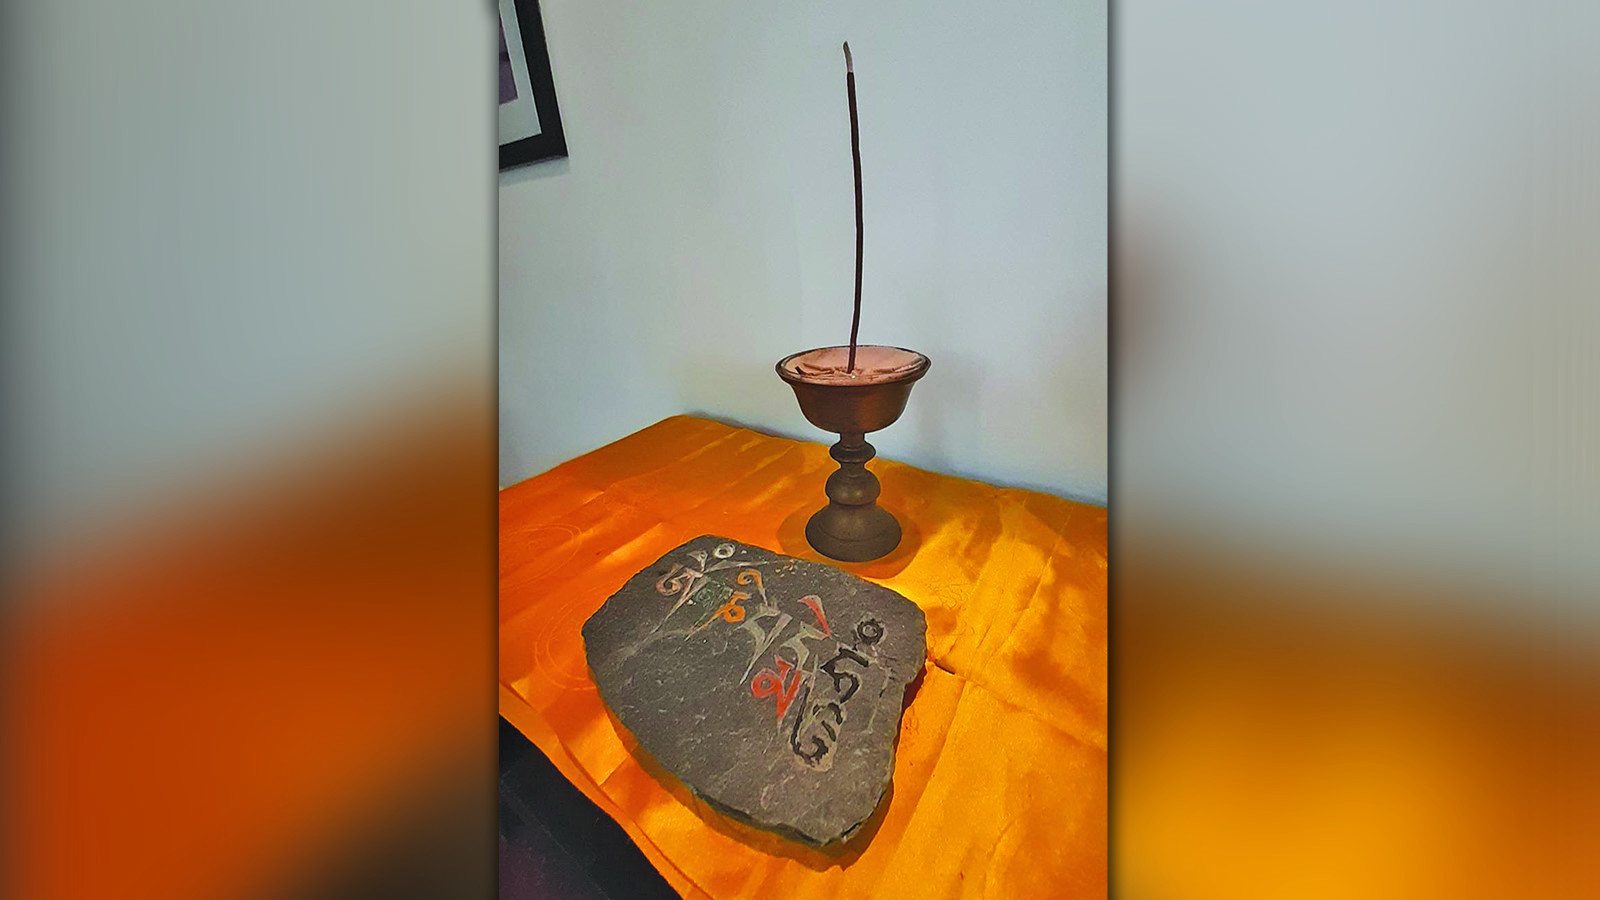 A Tibetan butter lamp with a rock slate on display with Om Mani Padme Hum (praise to the jewel in the lotus) written on it.